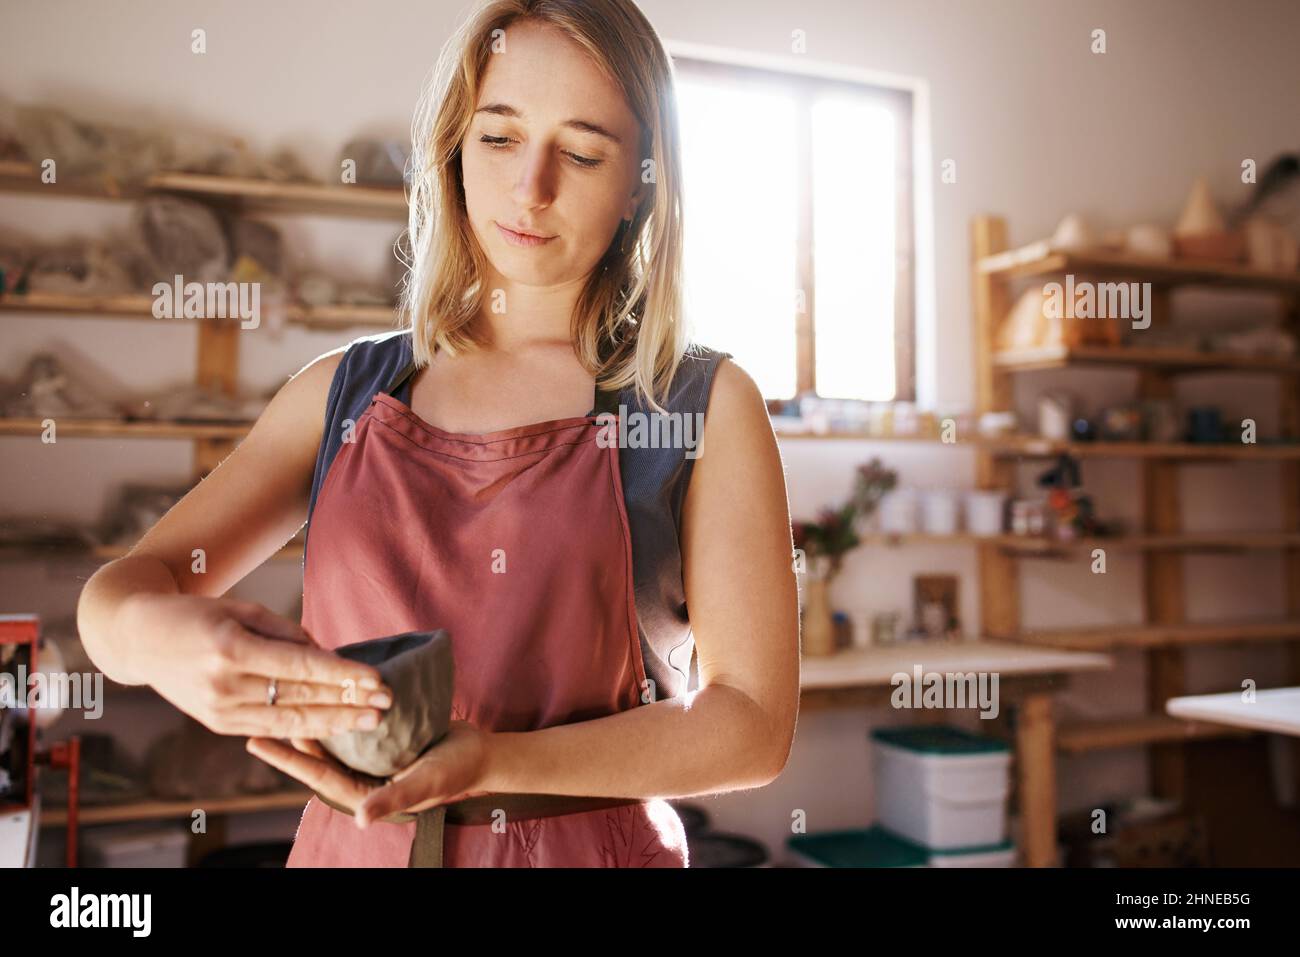 Paying careful attention to detail Stock Photo